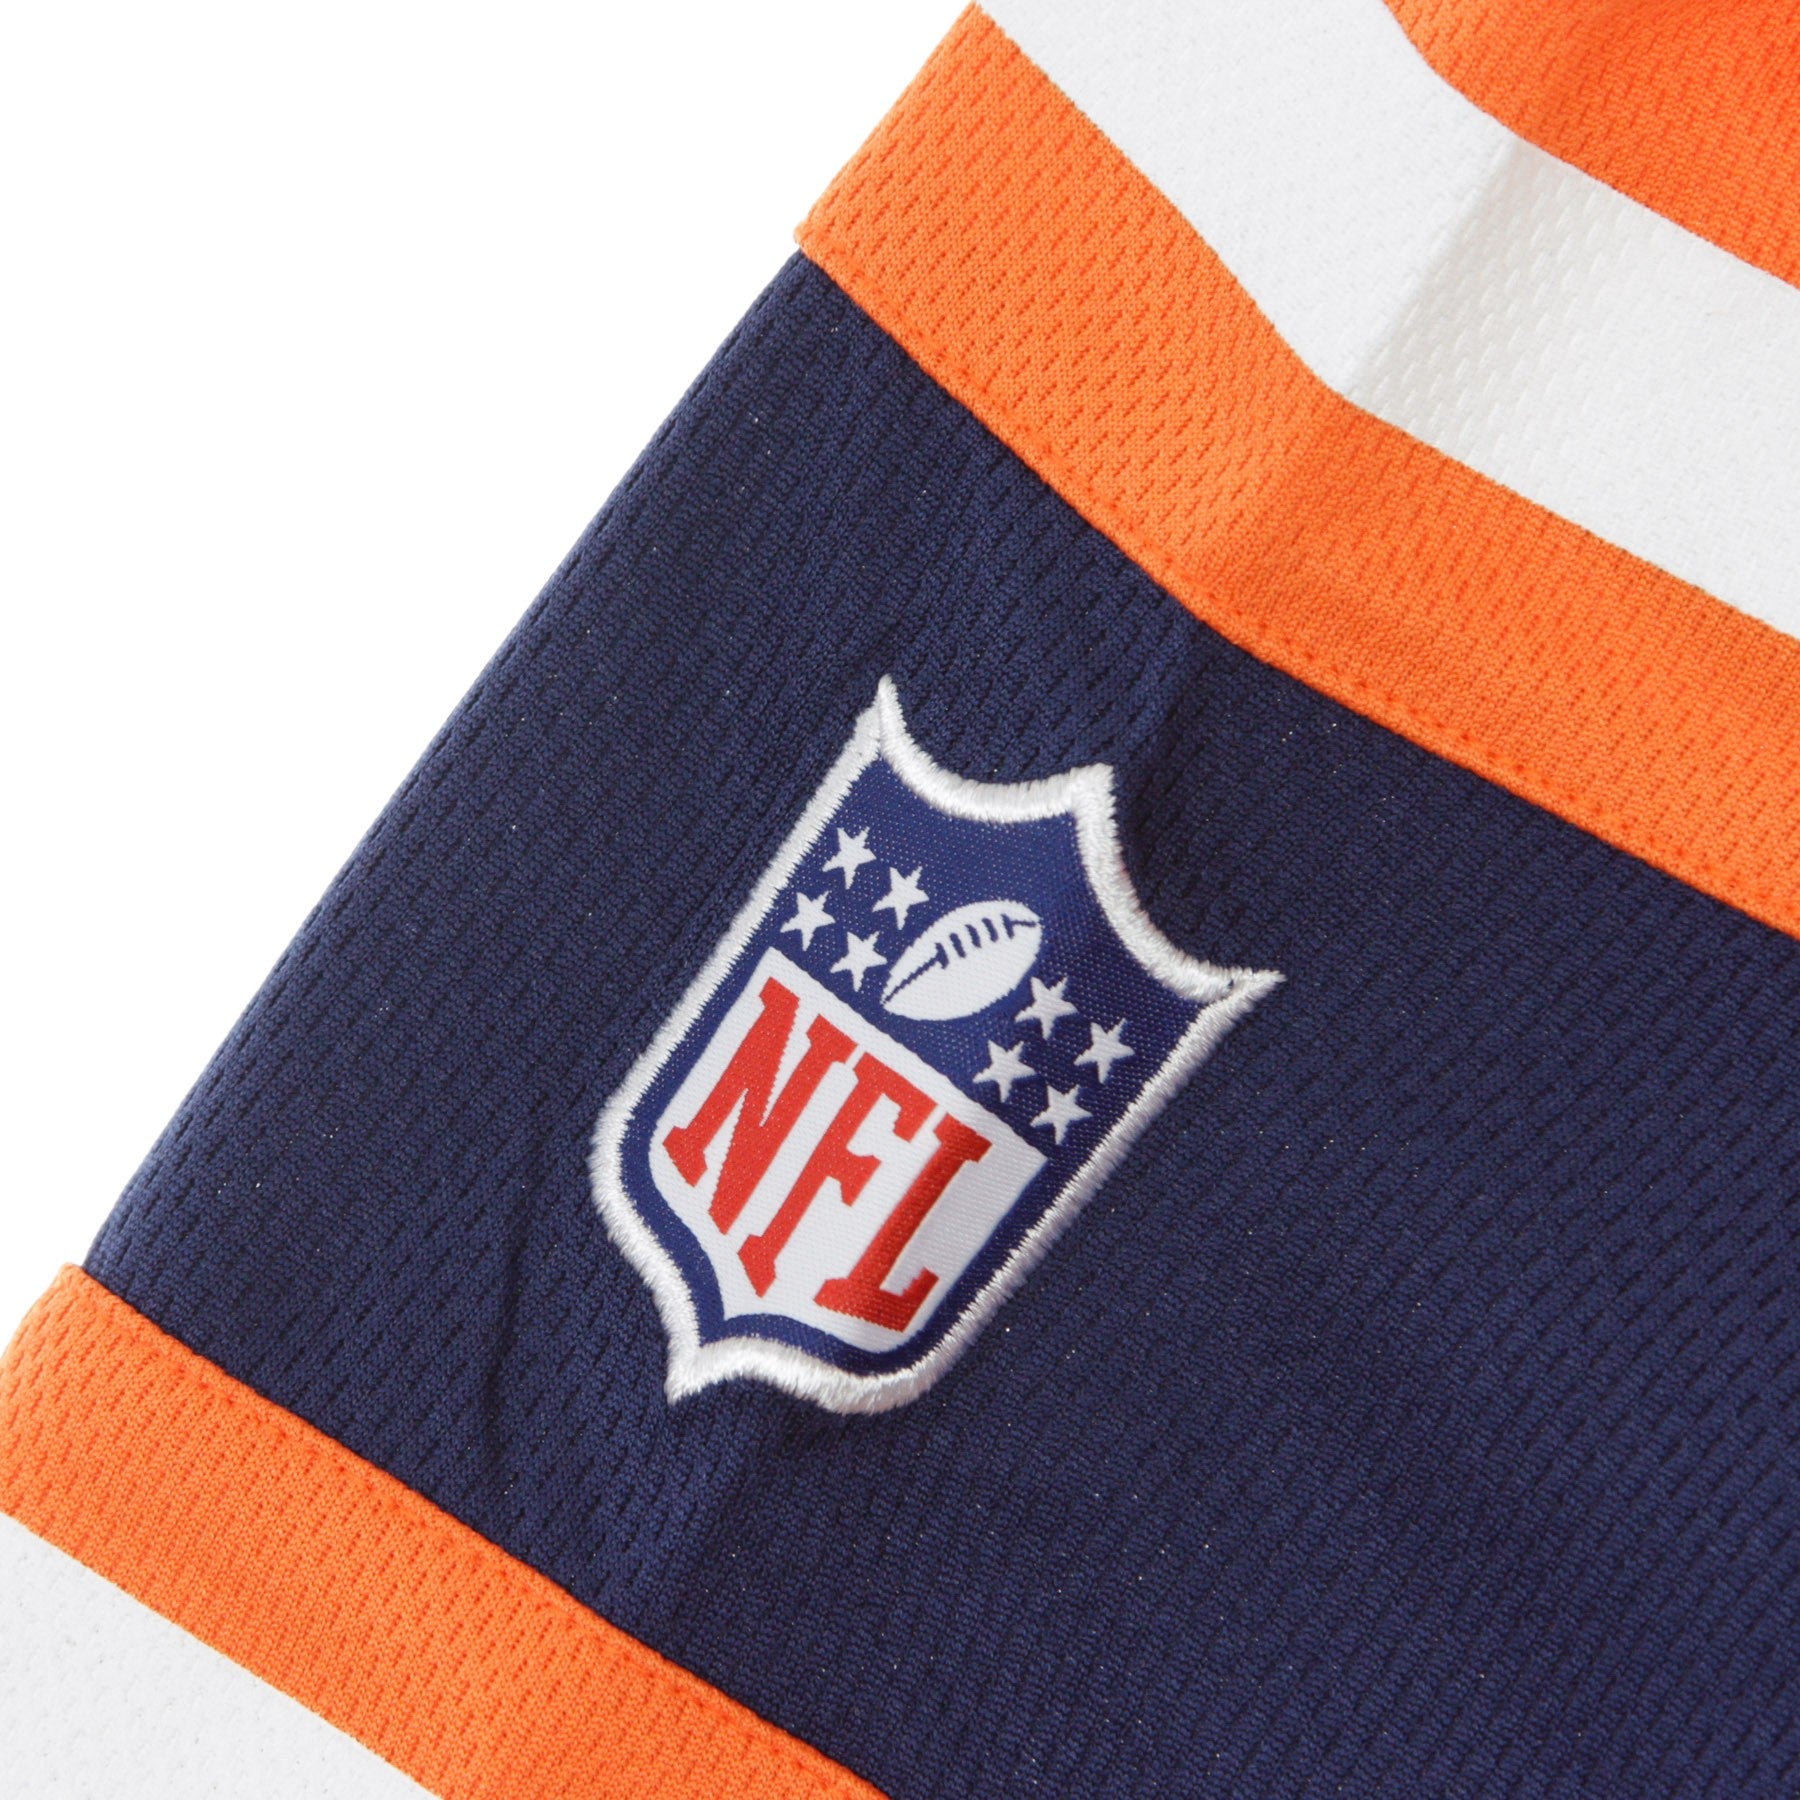 Casacca Uomo Nfl Iconic Franchise Poly Mesh Supporters Jersey Denbro Original Team Colors